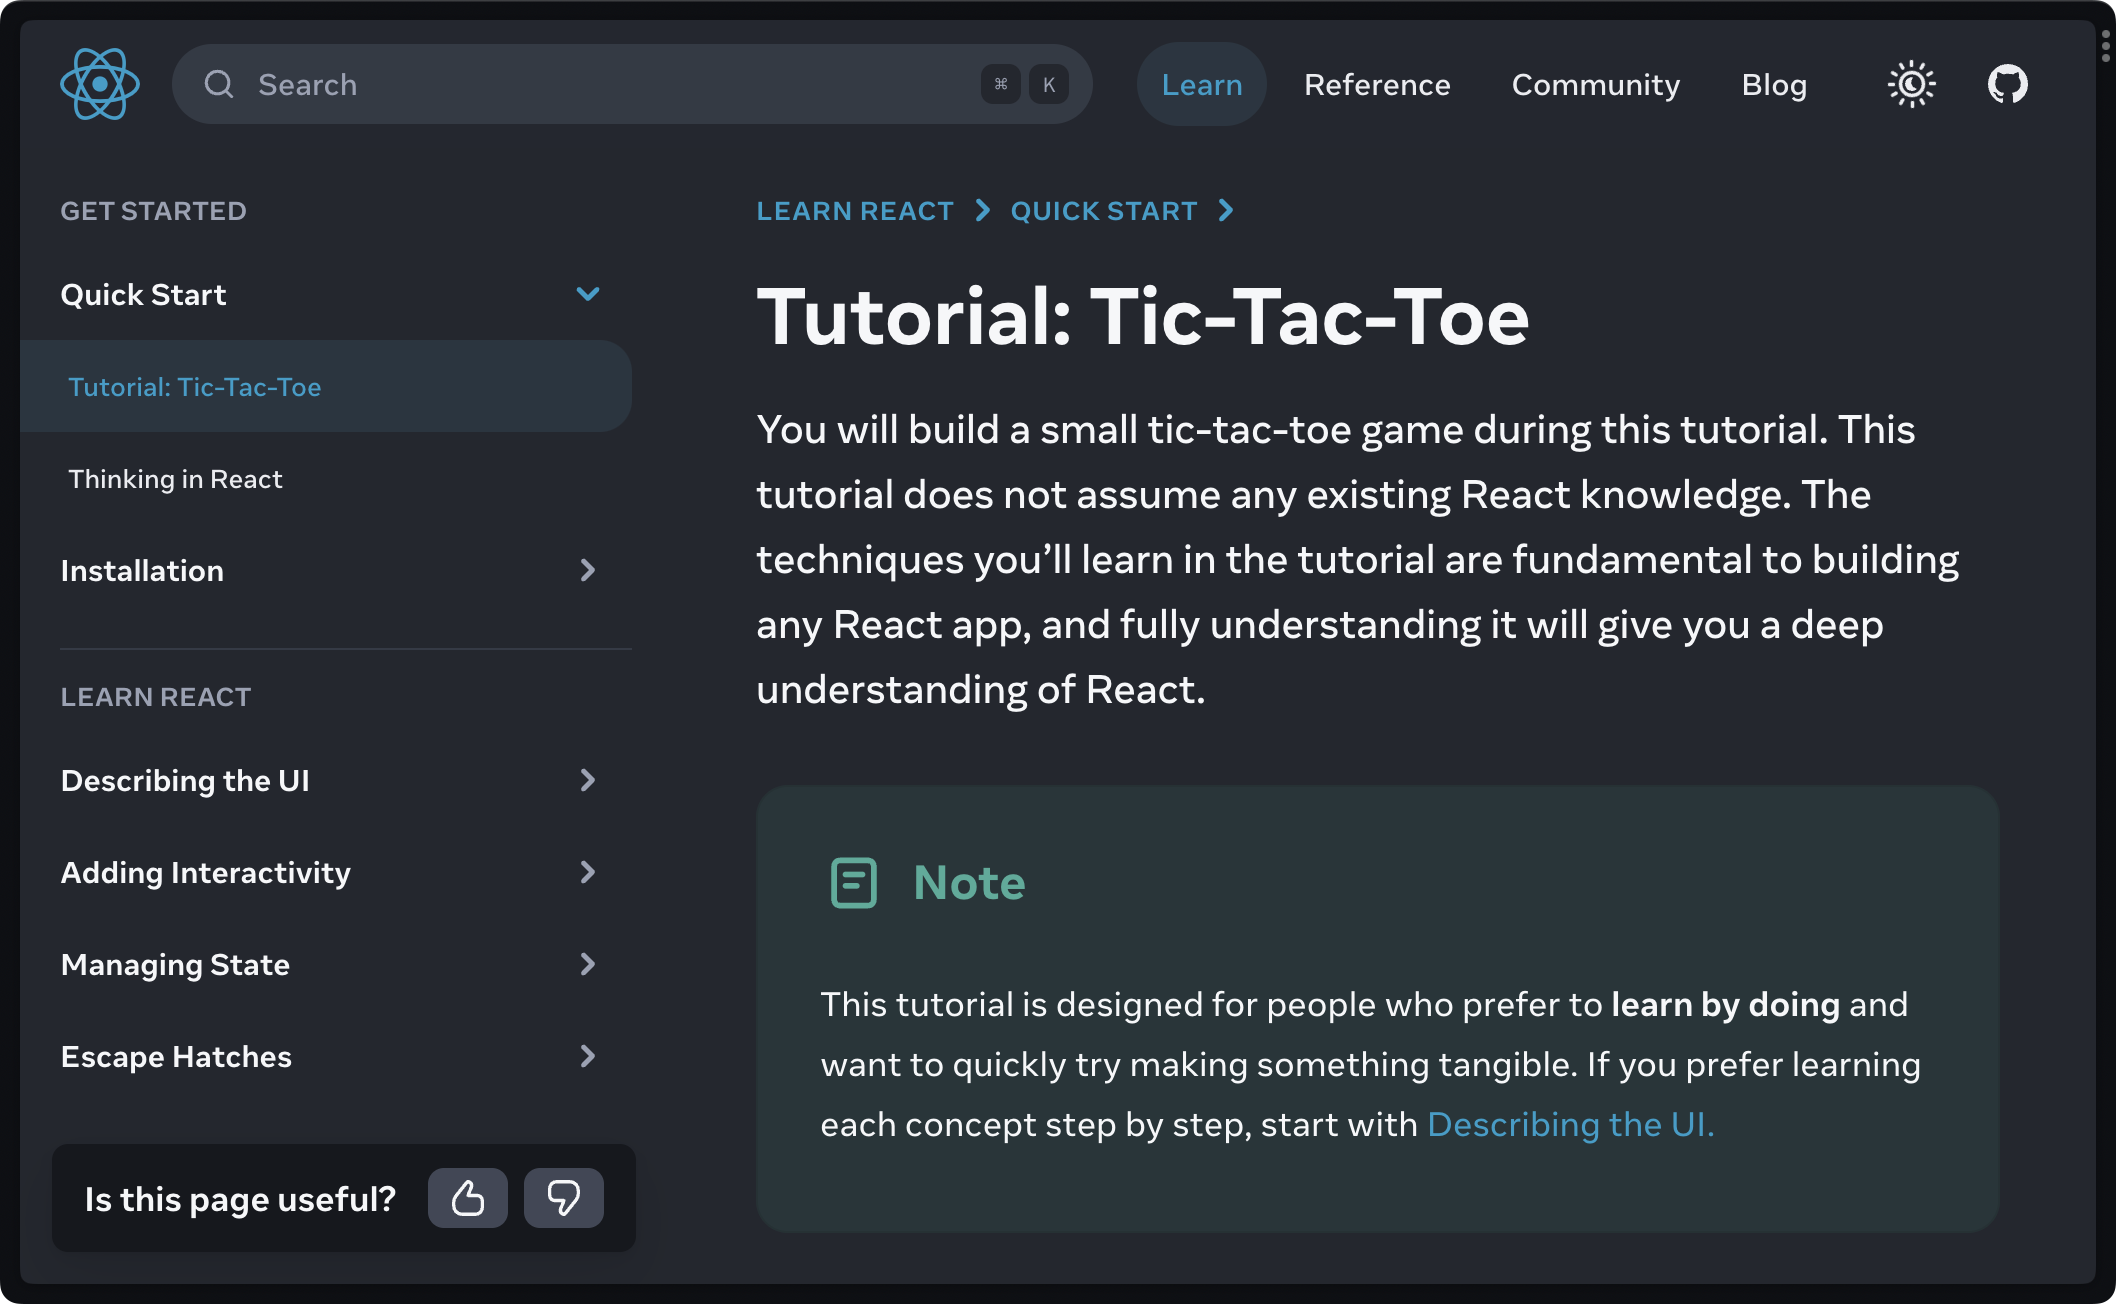 React documentation: Get Started / Tutorial: Tic-Tac-Toe